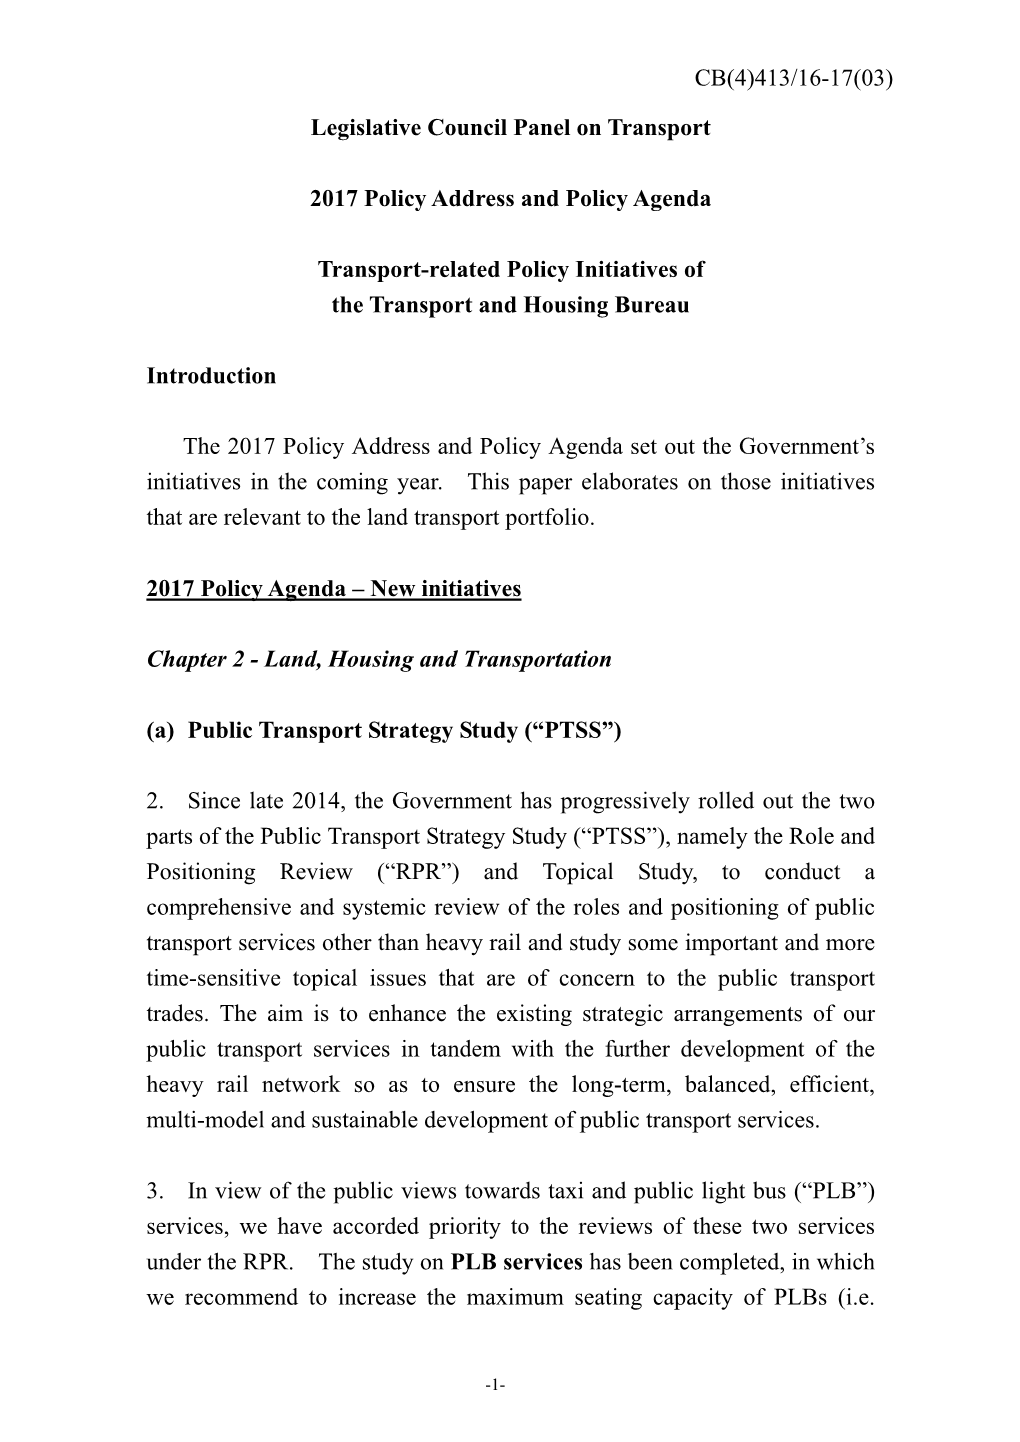 Legislative Council Panel on Transport 2017 Policy Address And